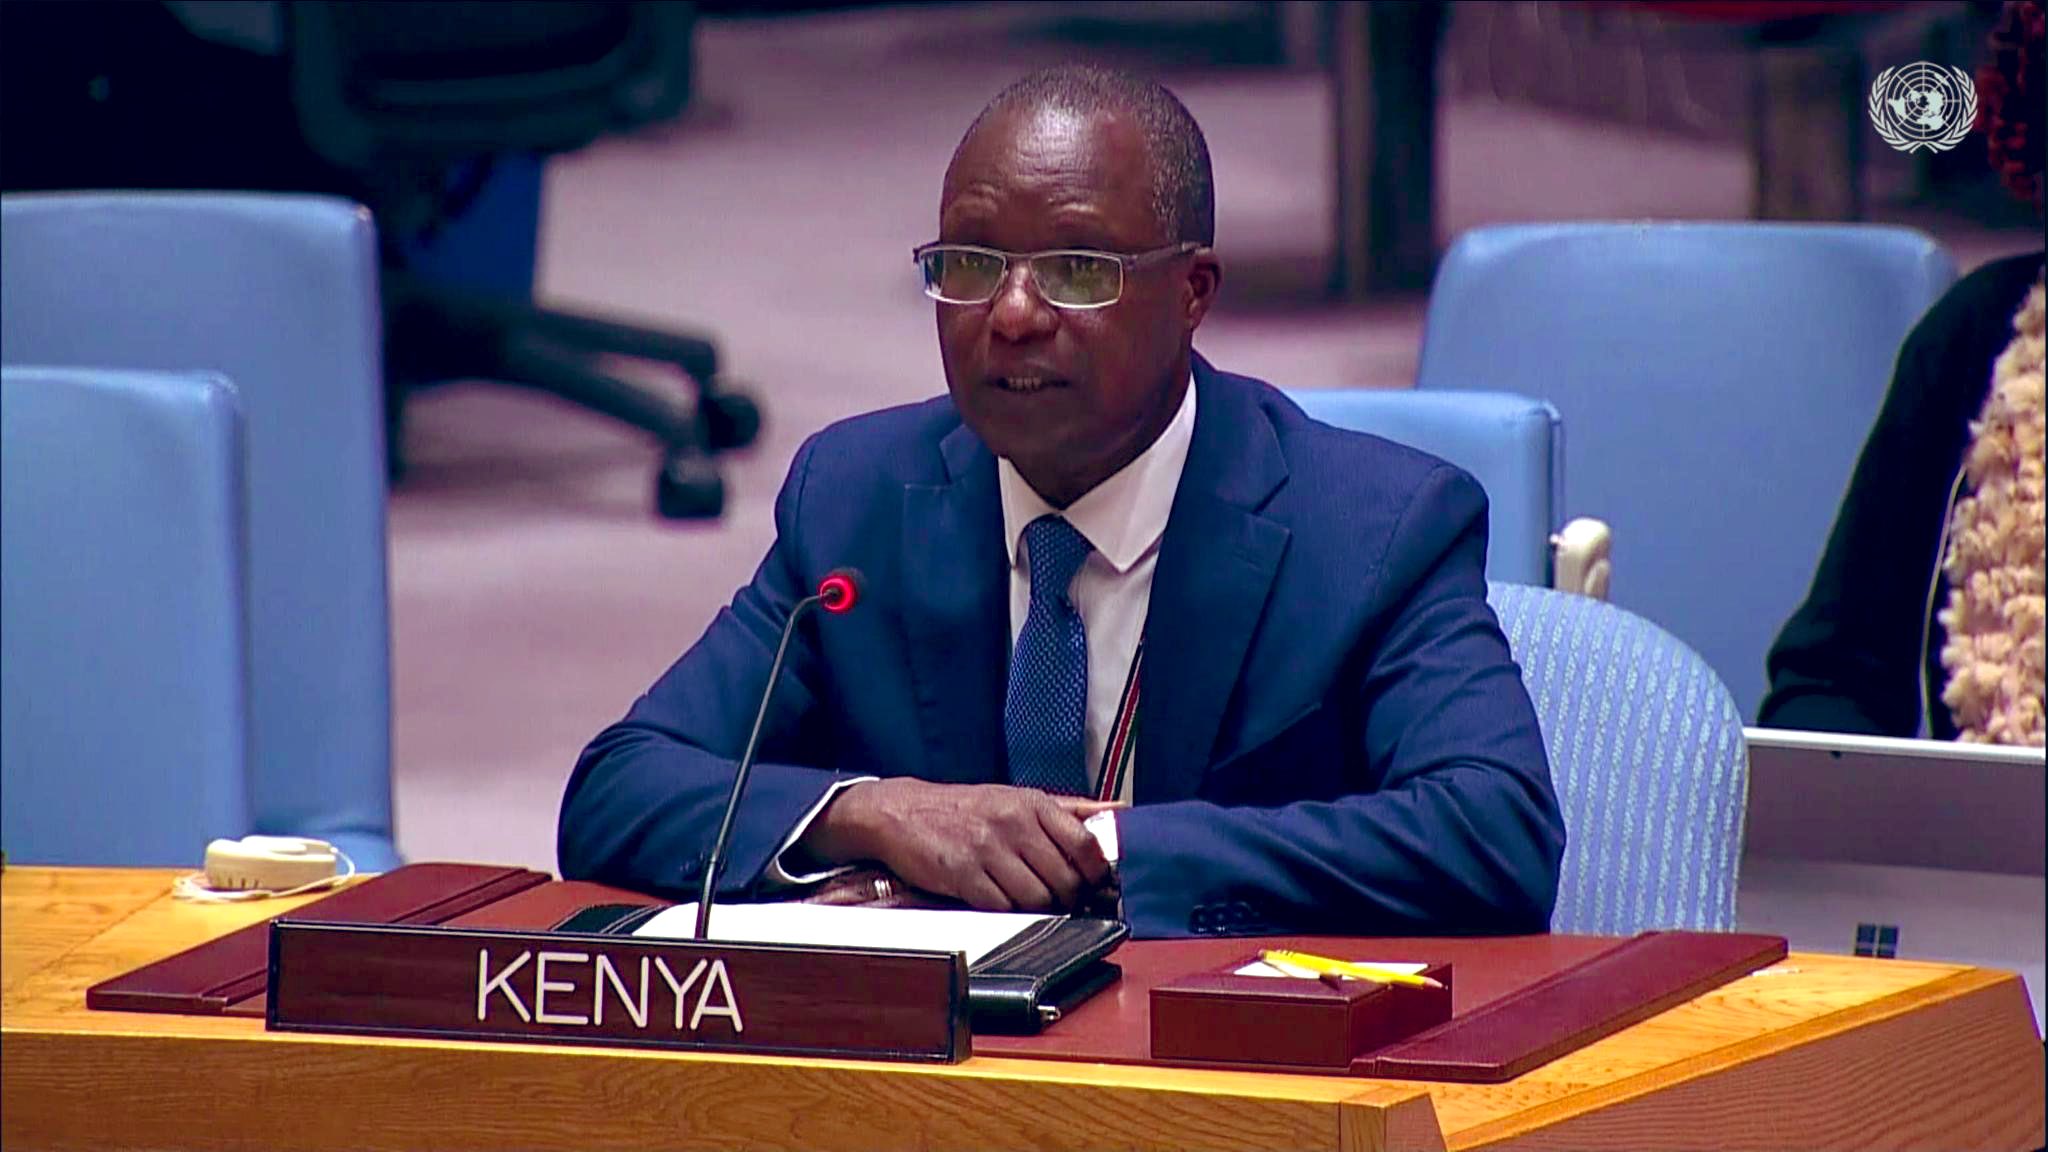 Kenya urges UN Security Council to fund, equip regional peace operations